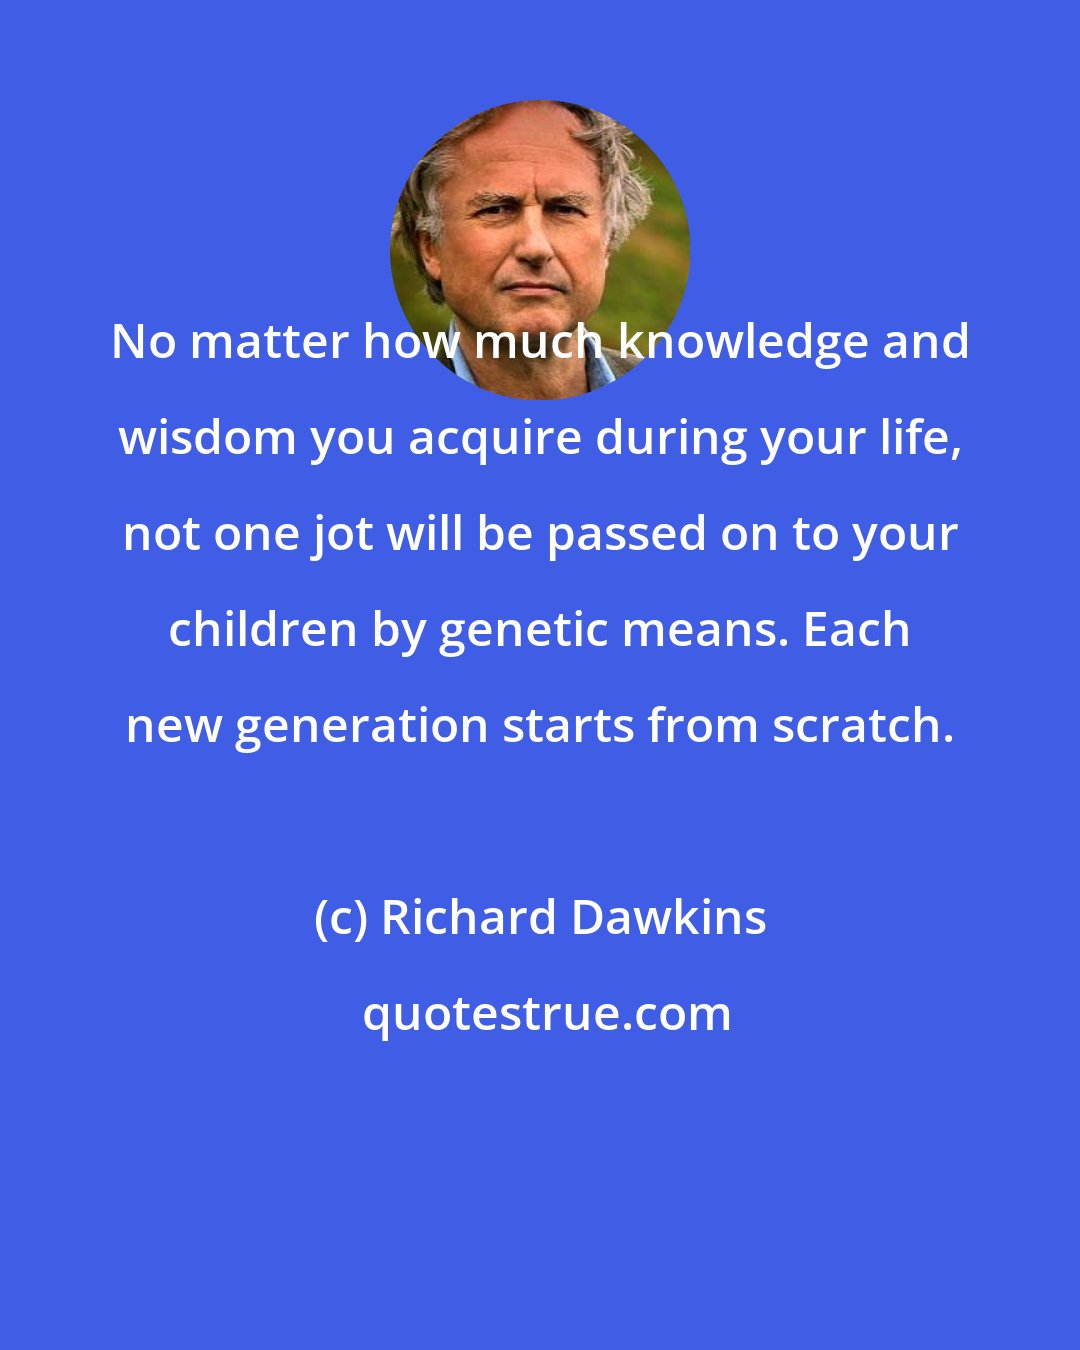 Richard Dawkins: No matter how much knowledge and wisdom you acquire during your life, not one jot will be passed on to your children by genetic means. Each new generation starts from scratch.